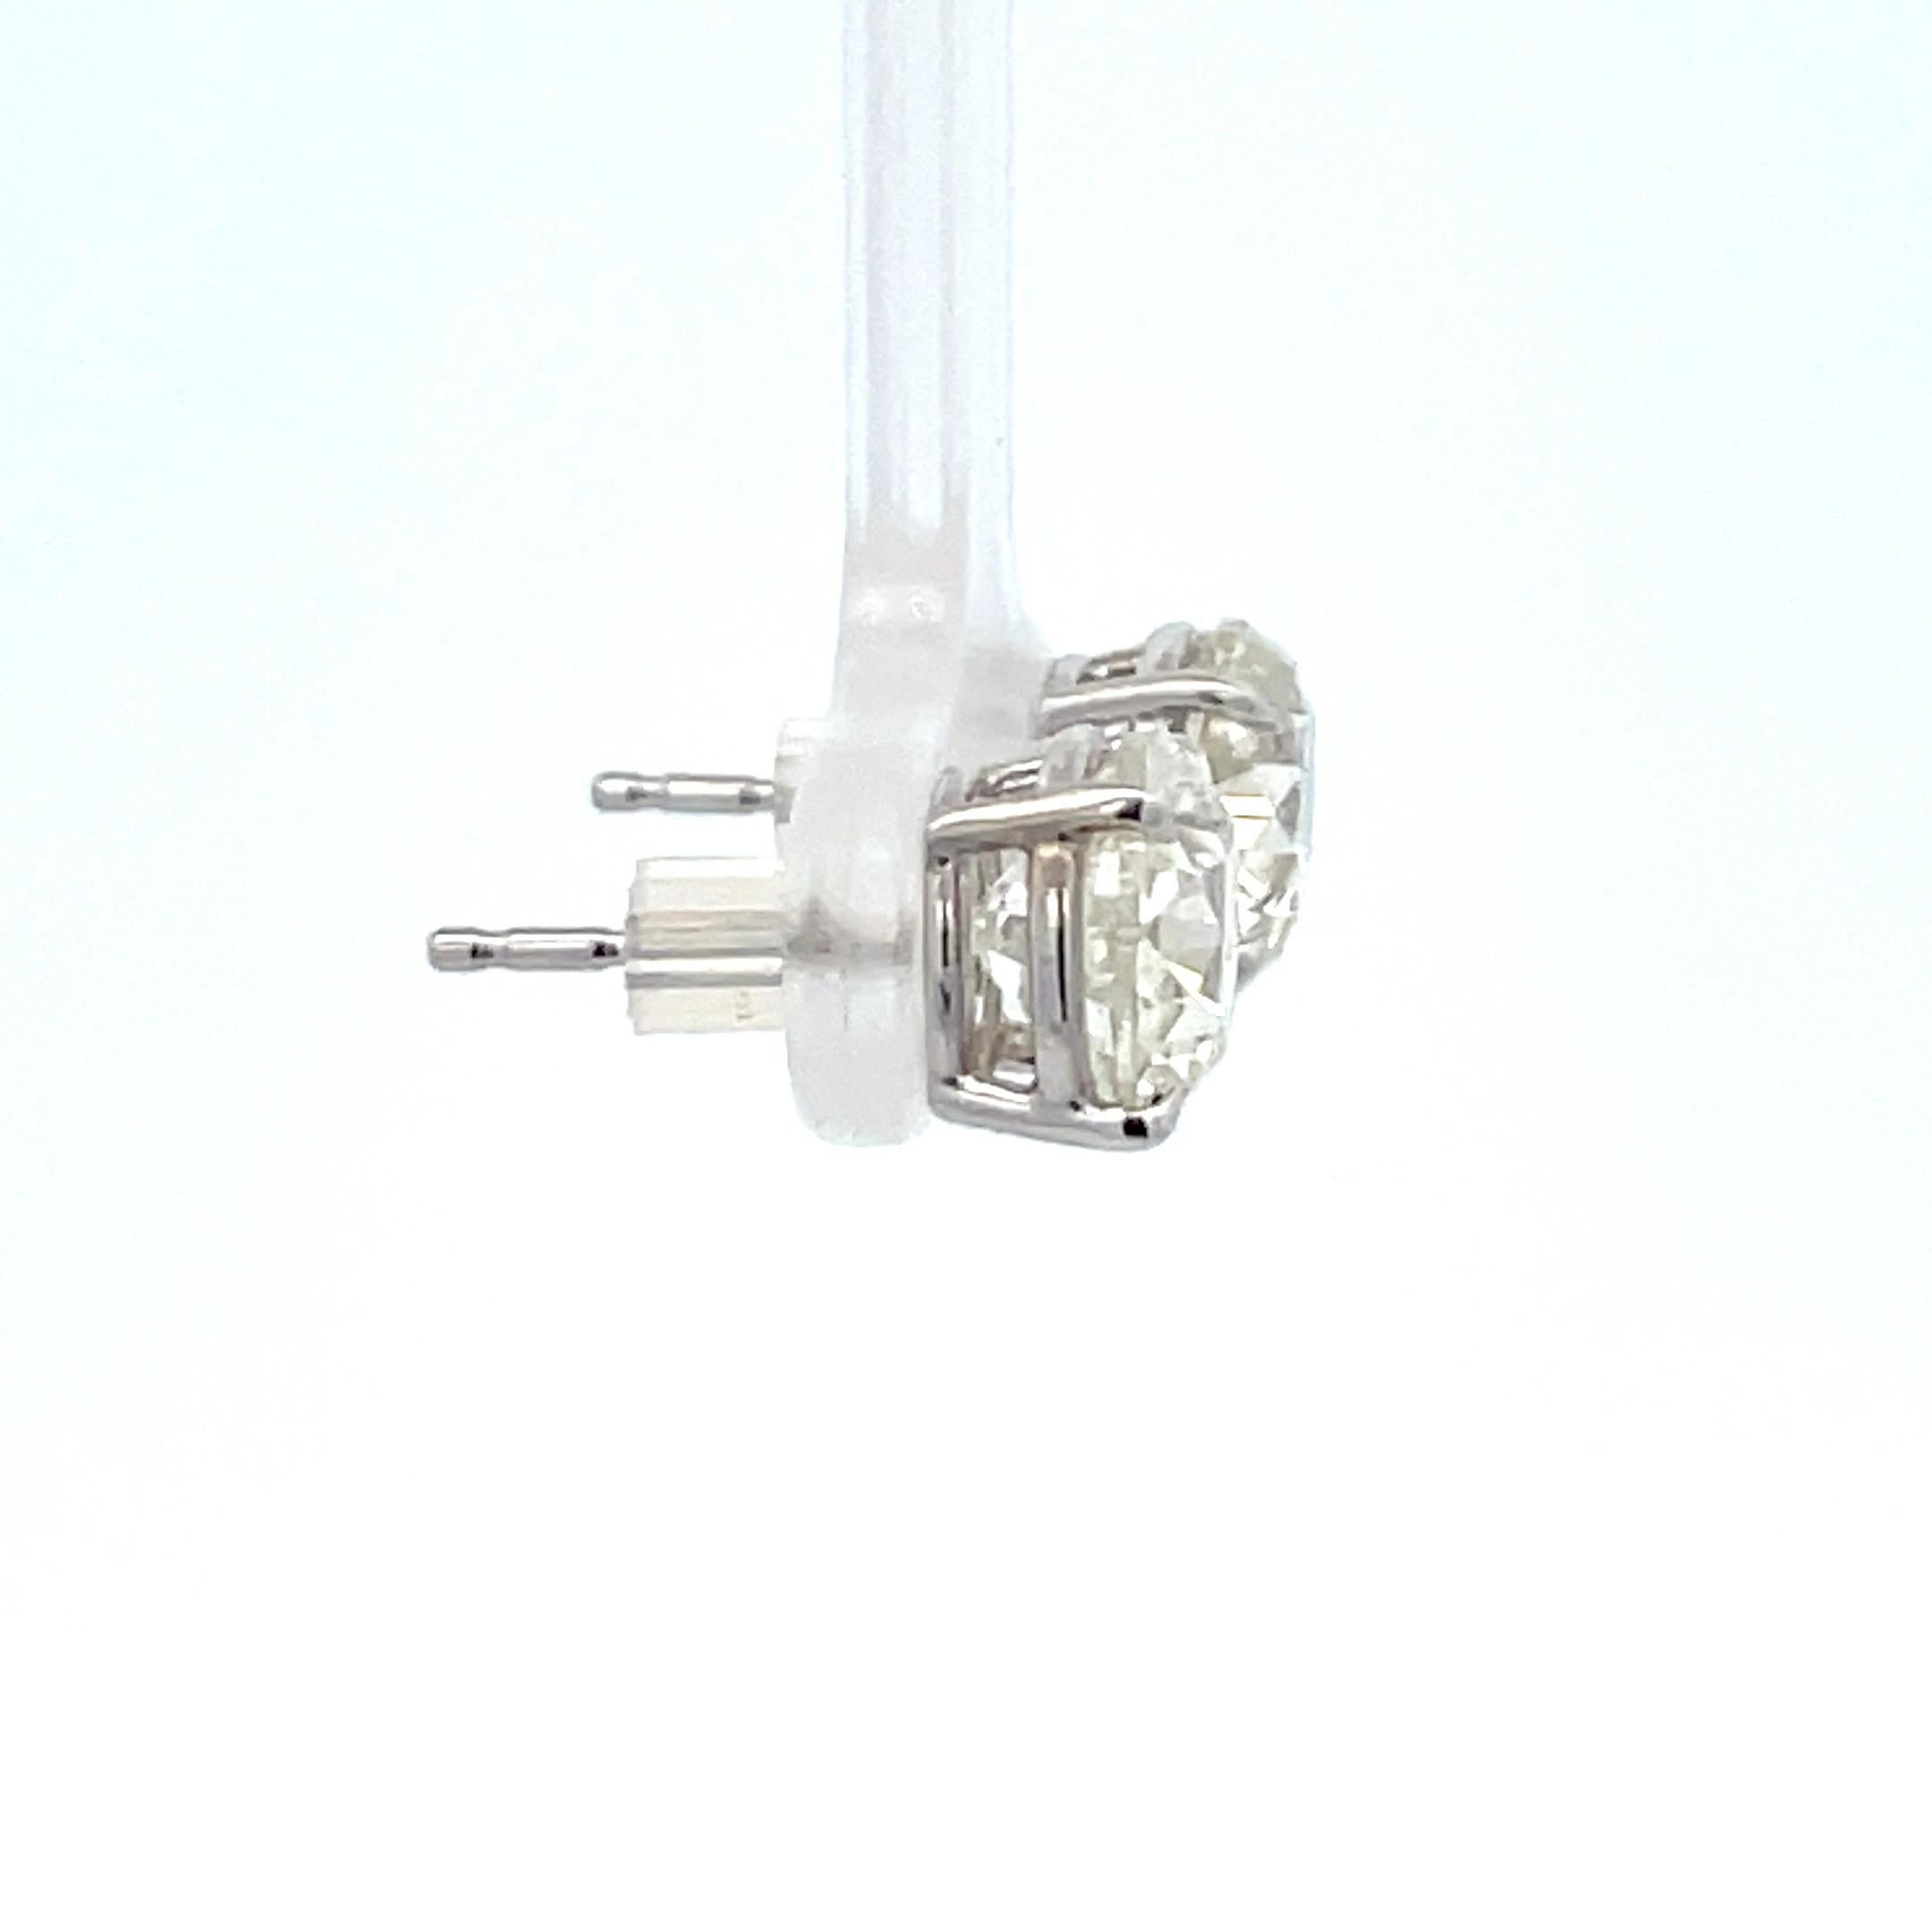 Diamond stud earrings weighing 4.04 Carats, in a 4 prong Basket setting in 14 Karat White Gold.
Color J-K
Clarity I1

Call/Message us to discuss more in detail.

Setting can be changed to a Basket, Martini or Champagne/ 3 or 4 Prong/ 14 or 18